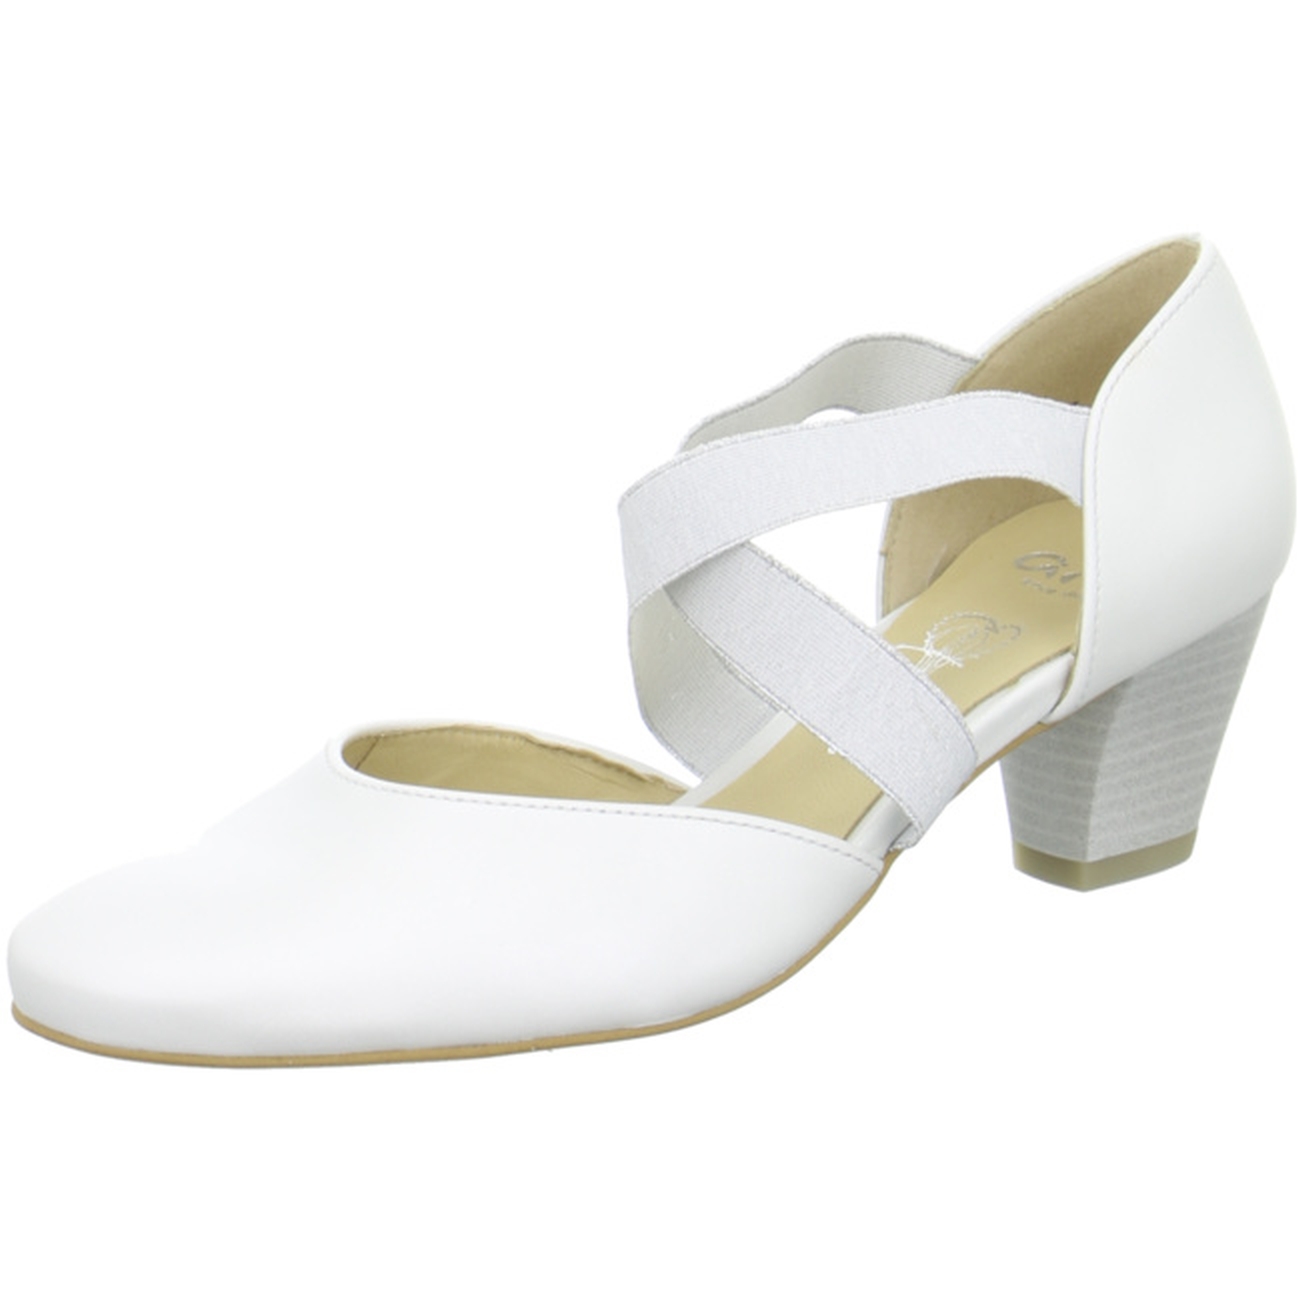 Ara Pumps - White smooth leather